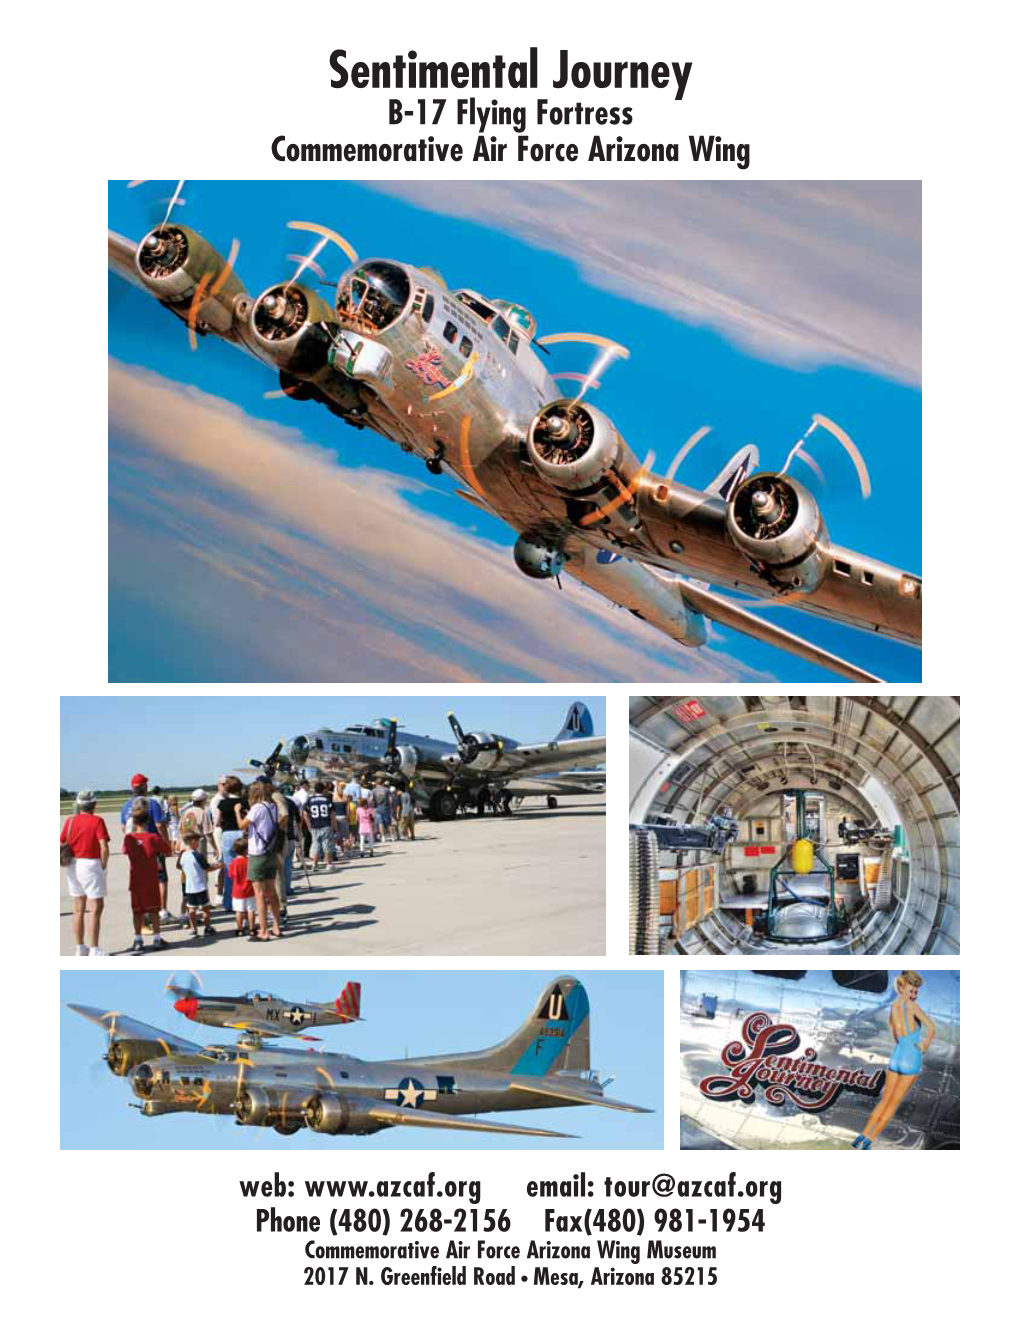 Sentimental Journey B-17 Flying Fortress Commemorative Air Force Arizona Wing